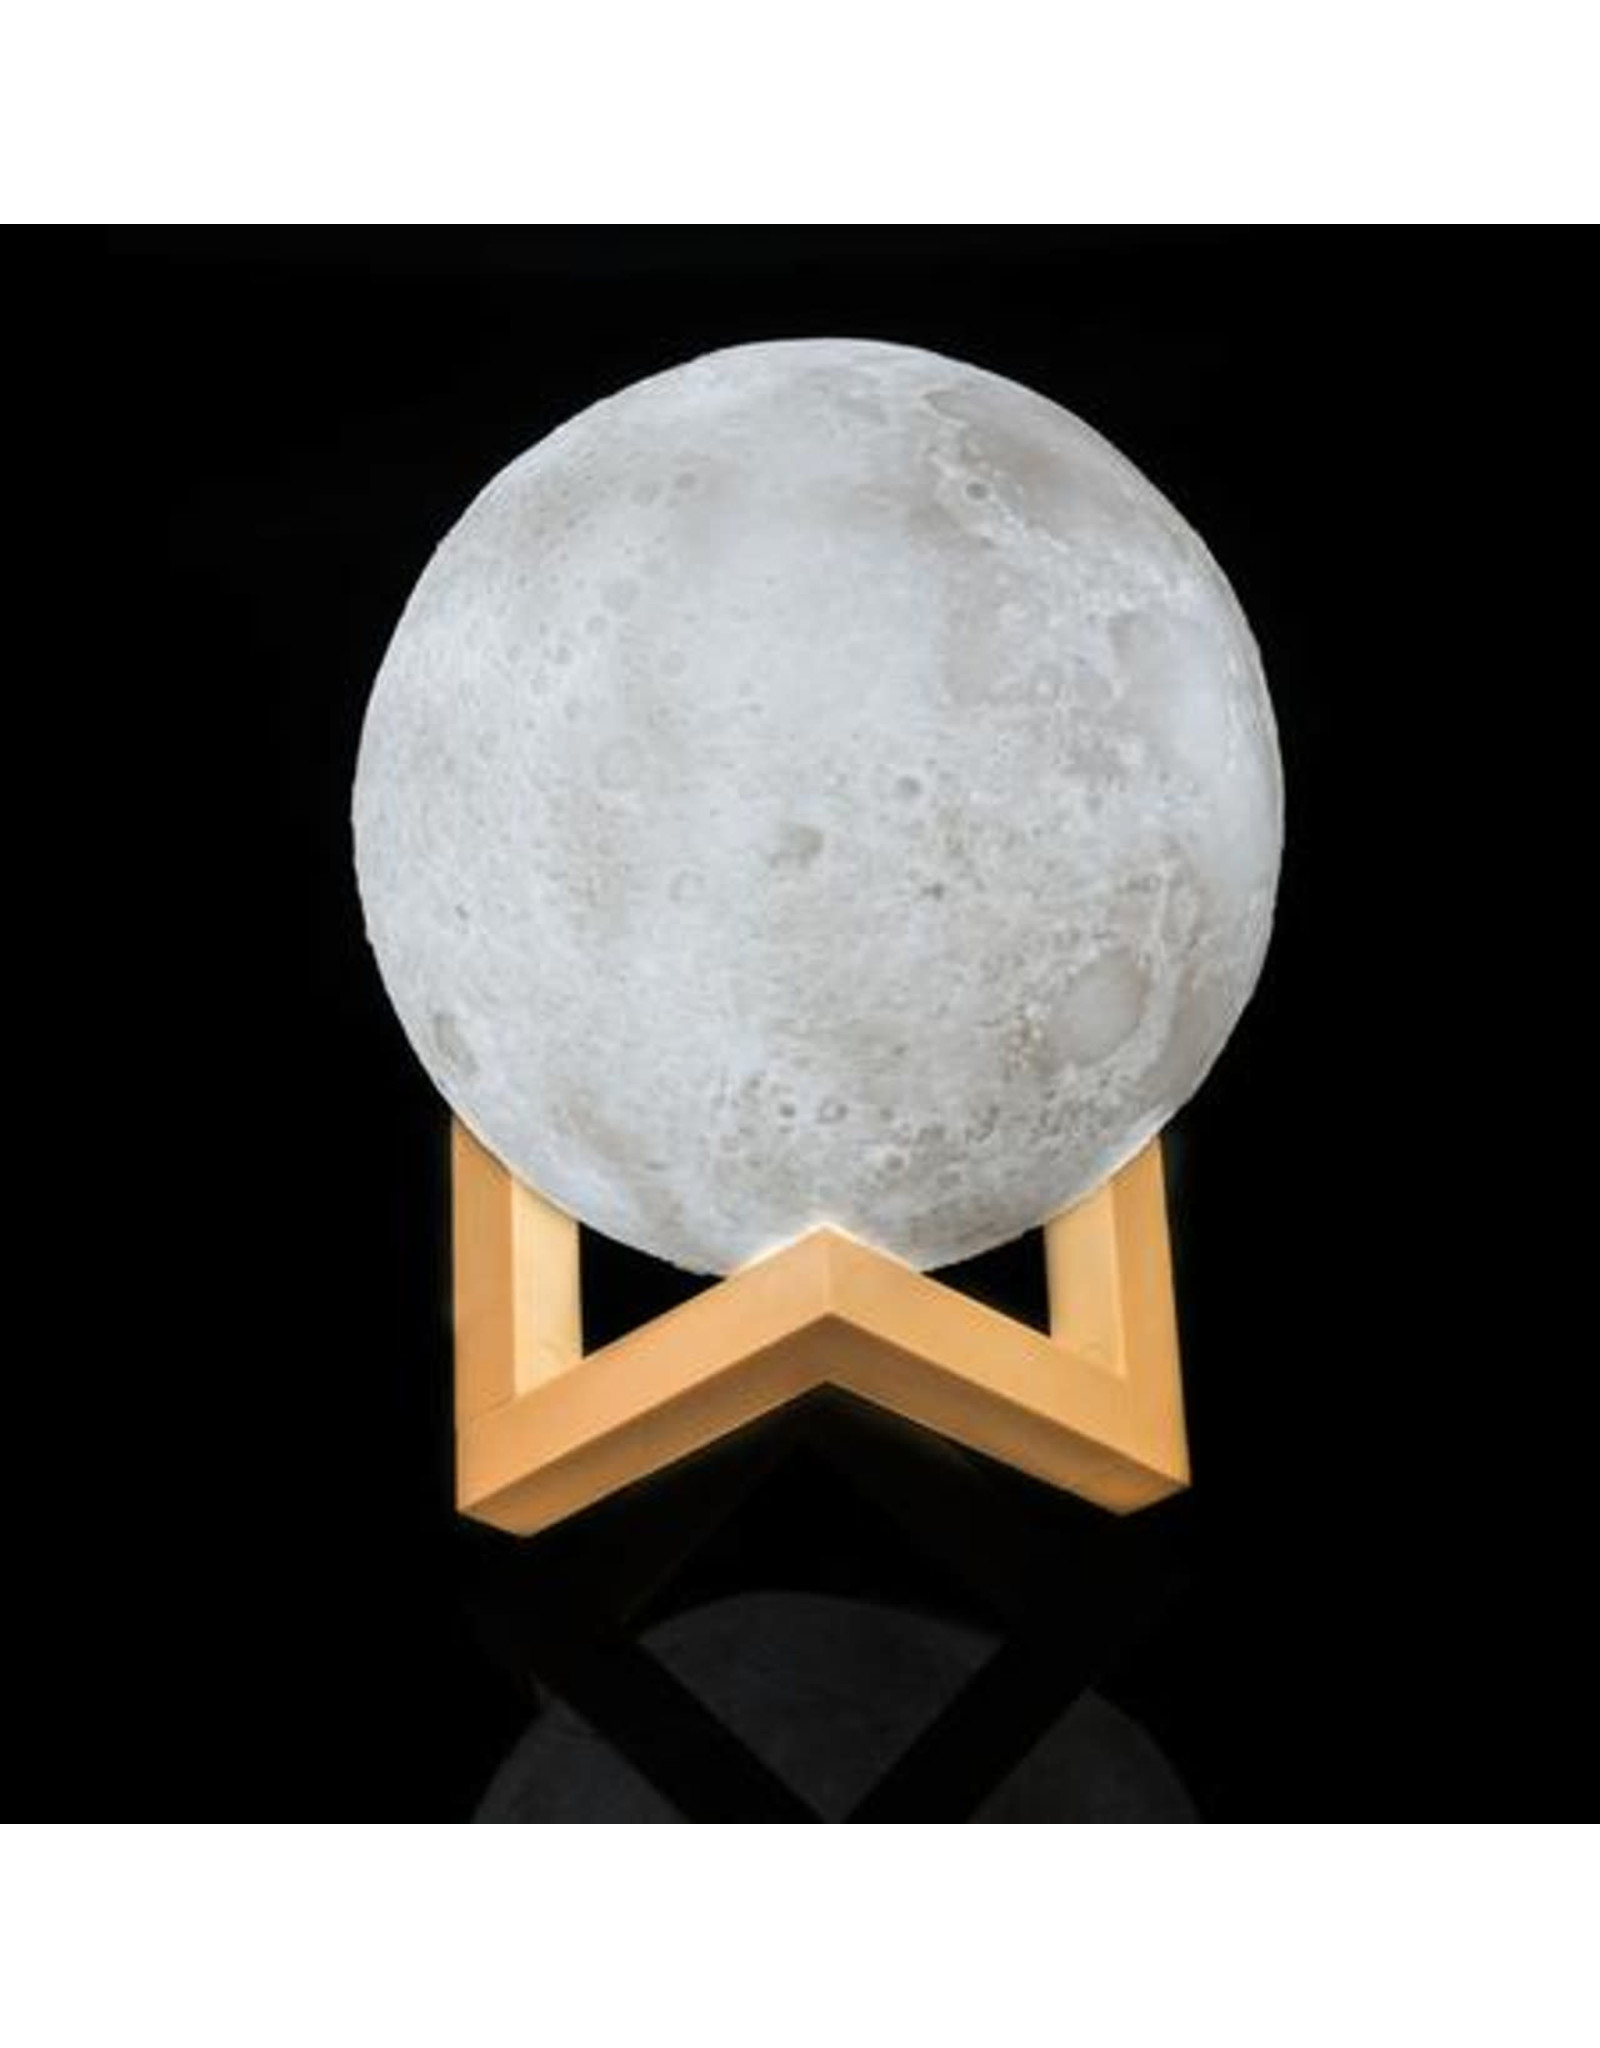 Lunar Night Light with stand - HJ-1410